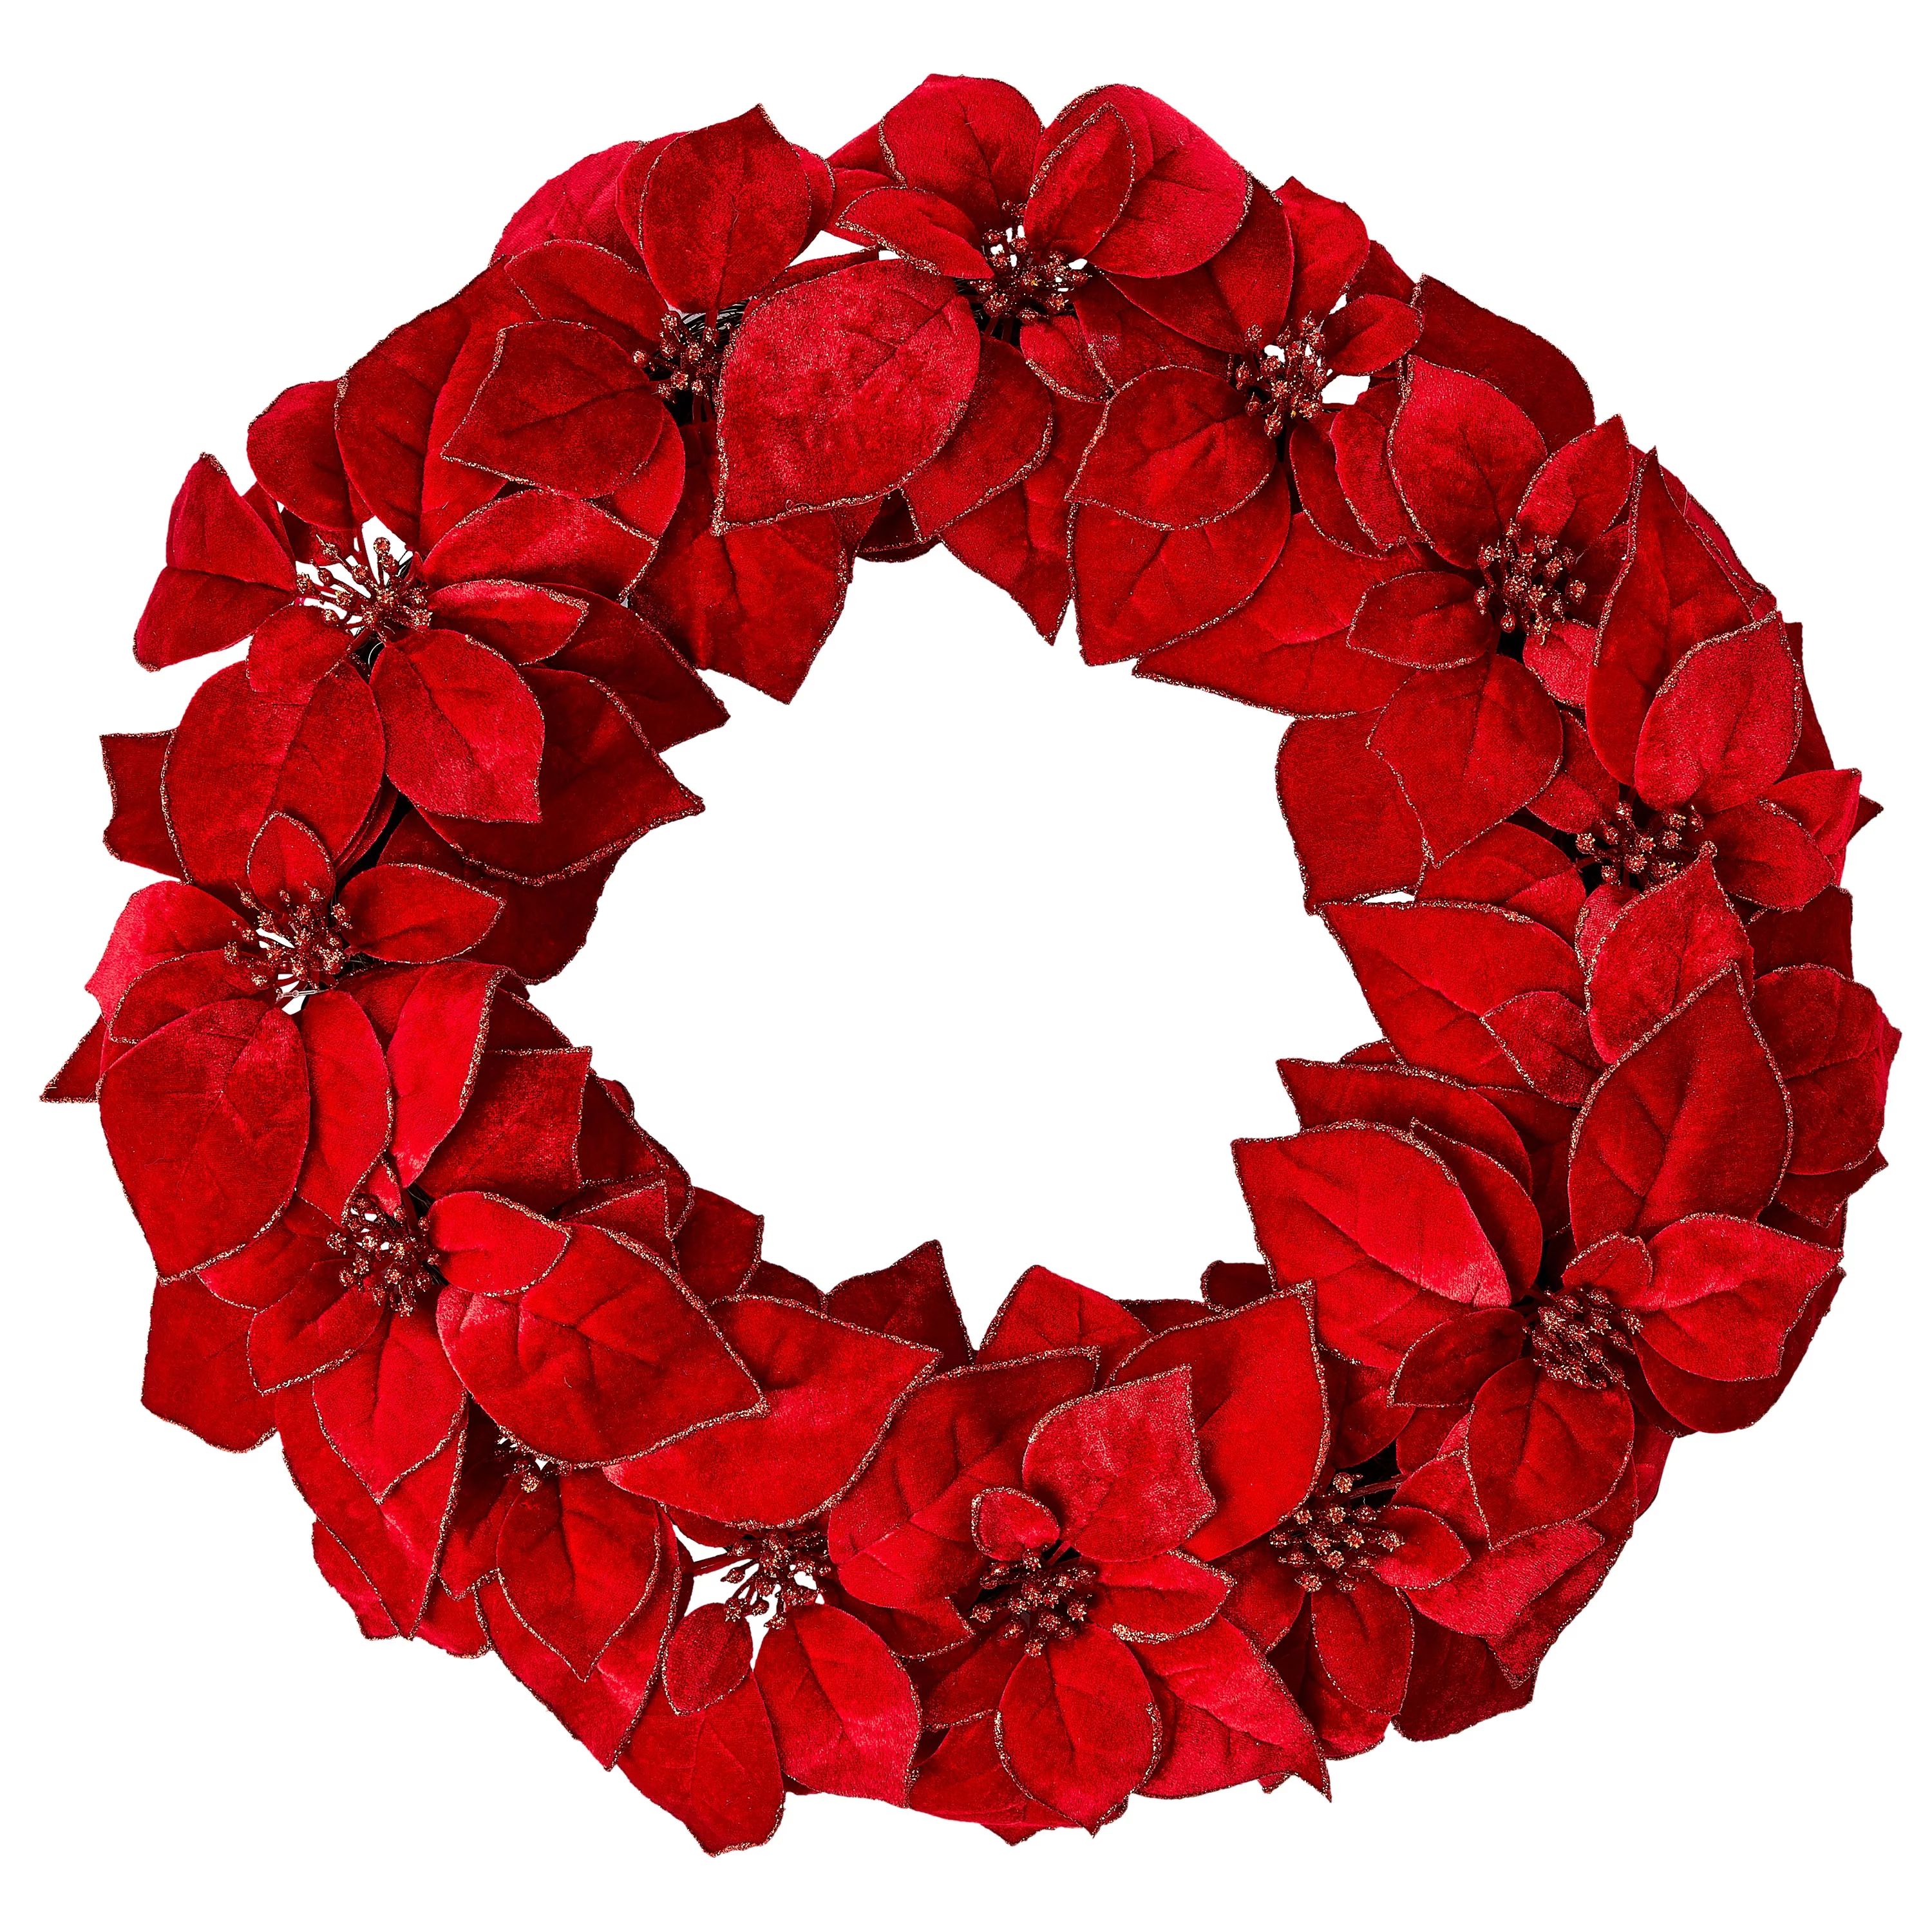 Red Poinsettia Christmas Wreath, 28 in x 28 in, by Holiday Time | Walmart (US)